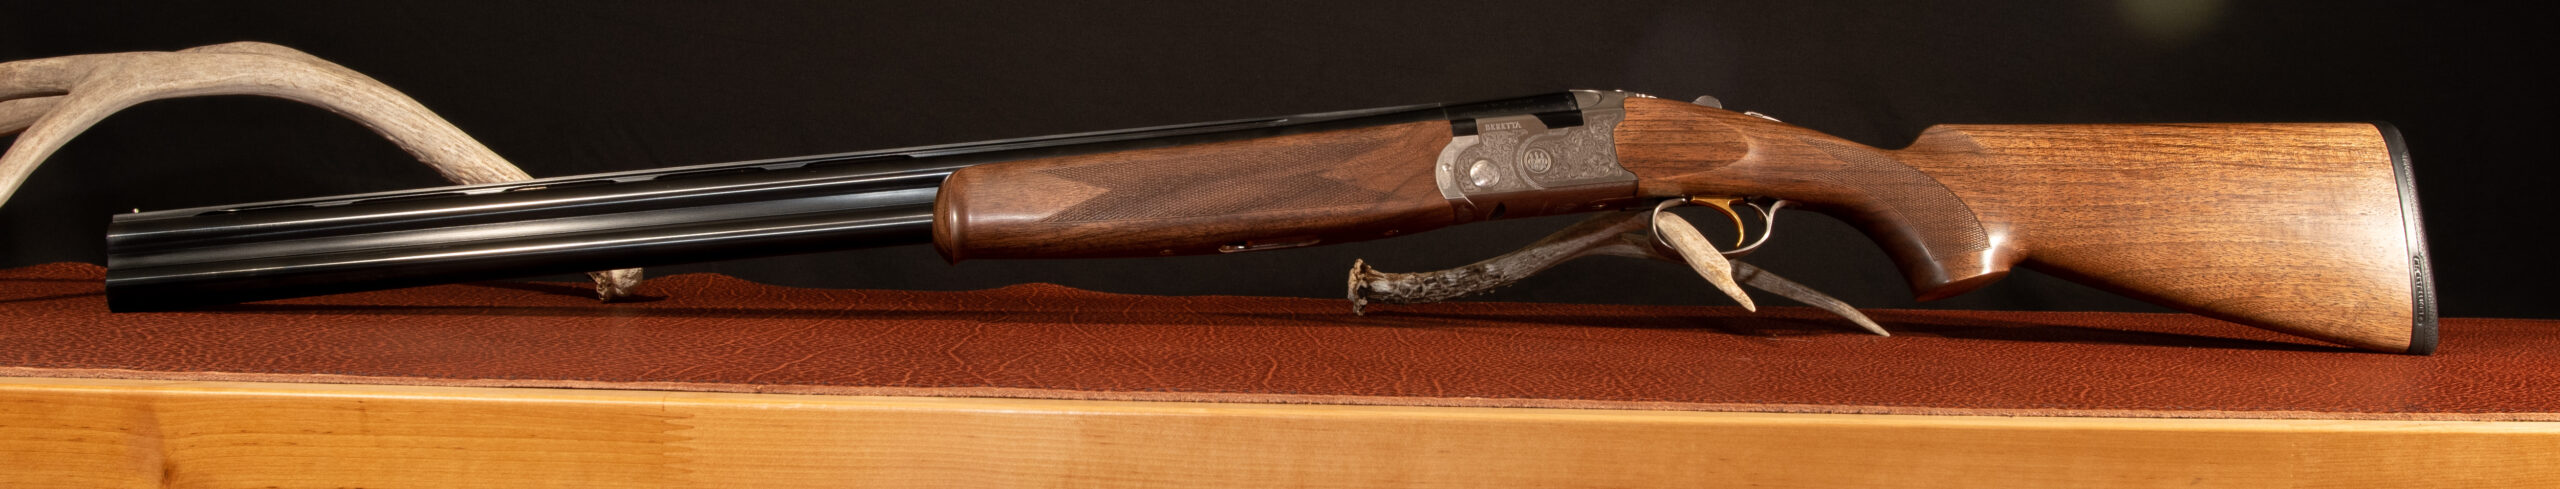 Beretta Silver Pigeon Gallery of Arms